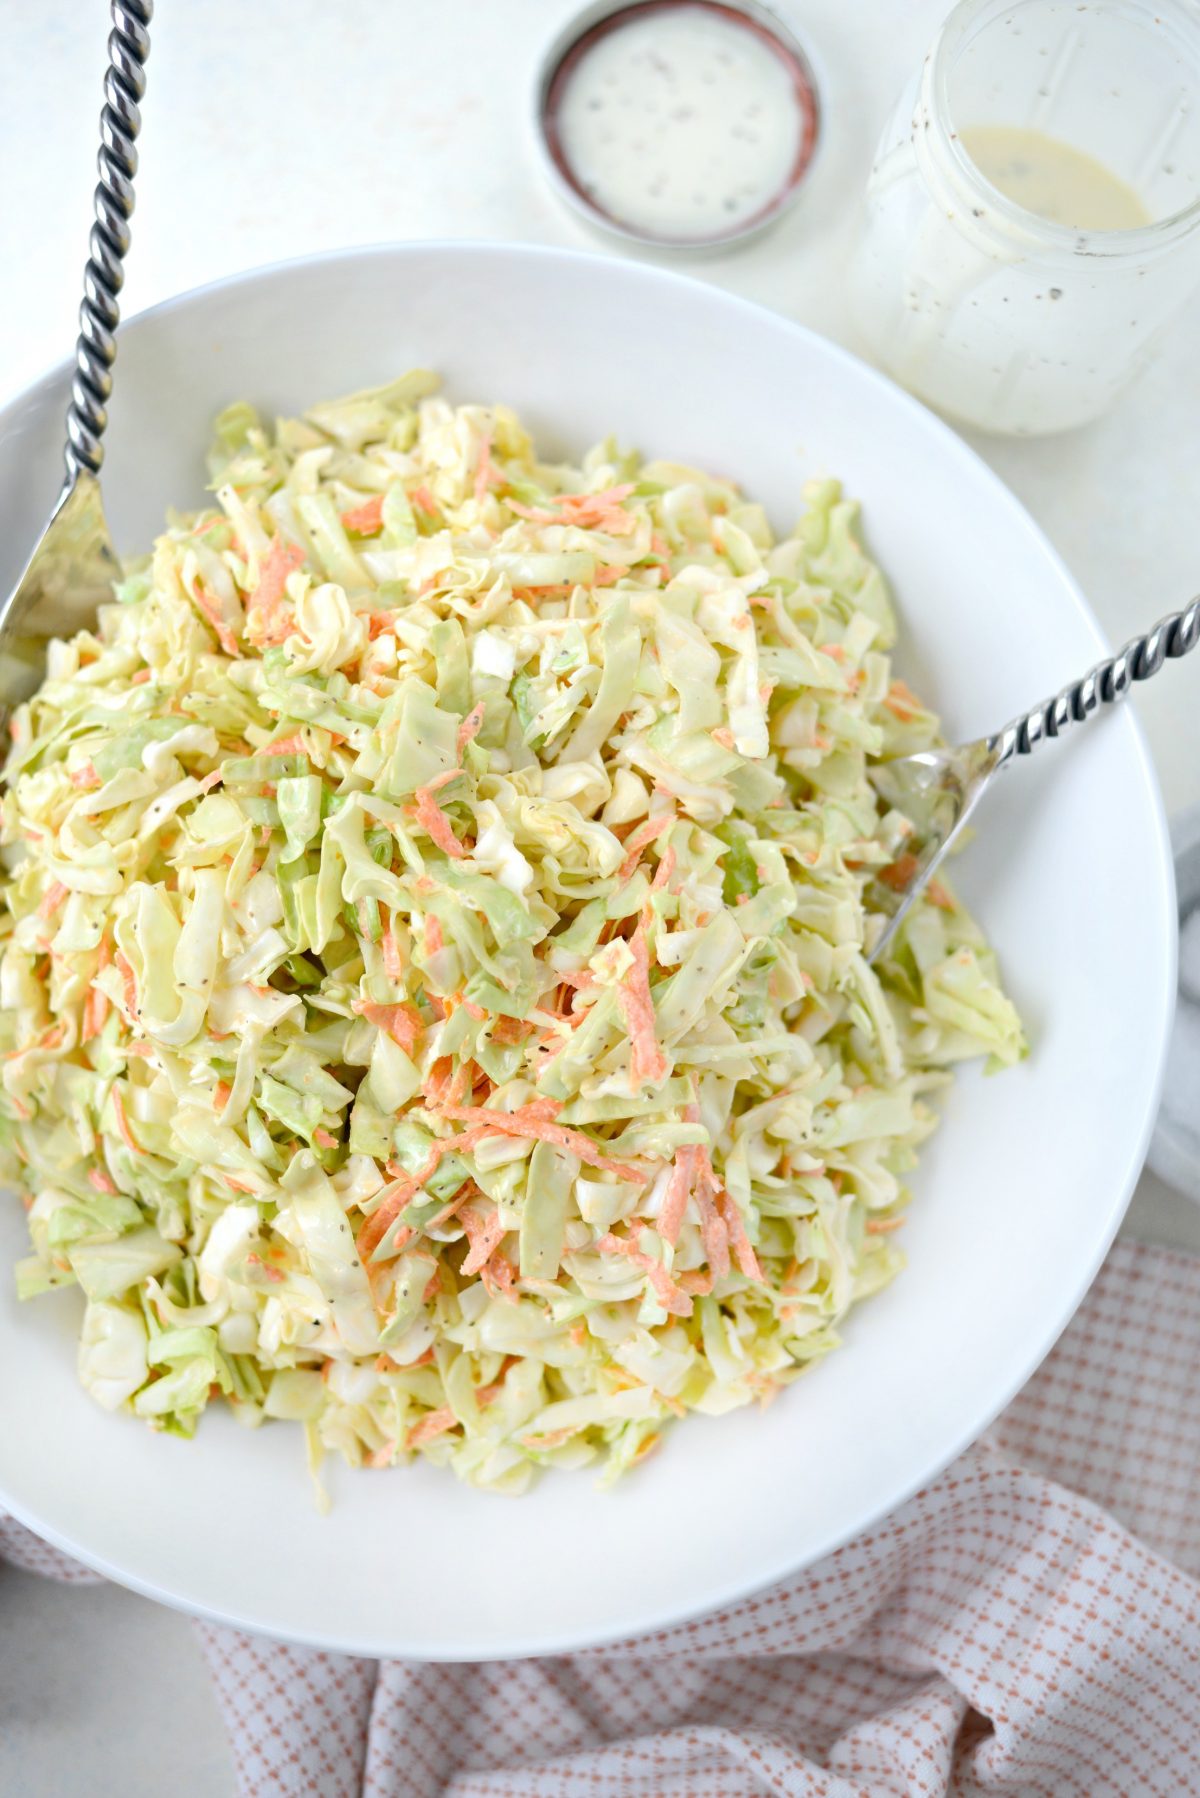 Classic Coleslaw Recipe with Homemade Dressing l SimplyScratch.com (15)